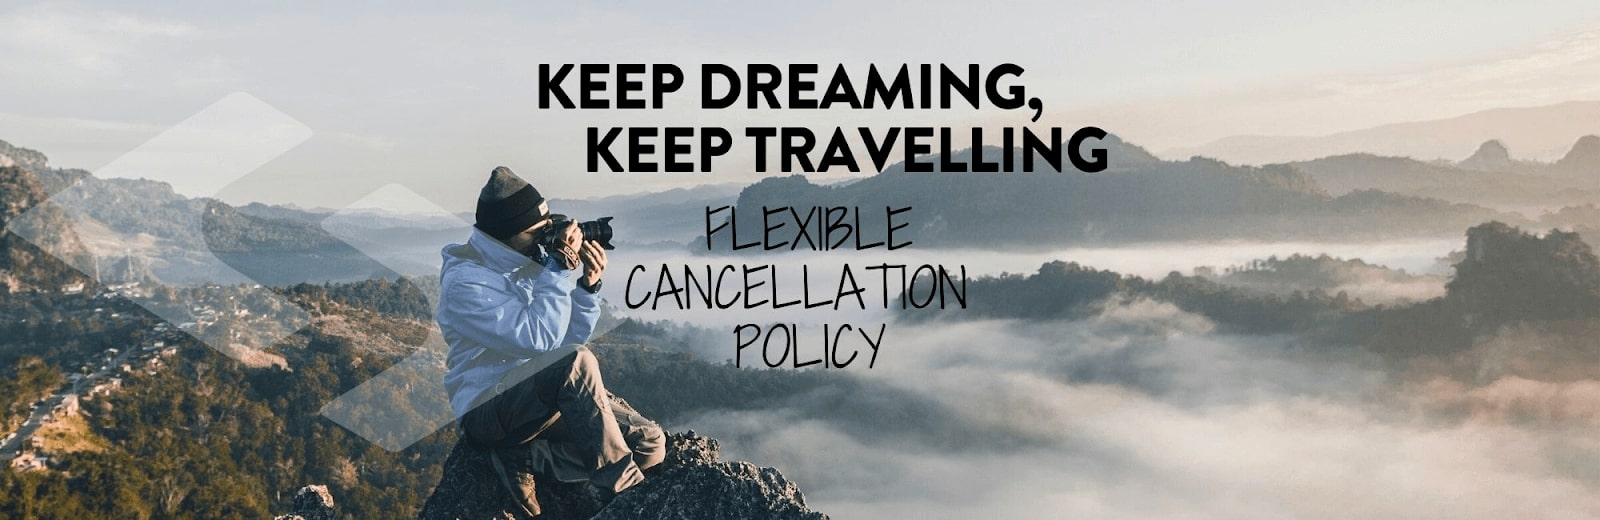 How to create a flexible tour cancelation policy that boosts your business Image 4